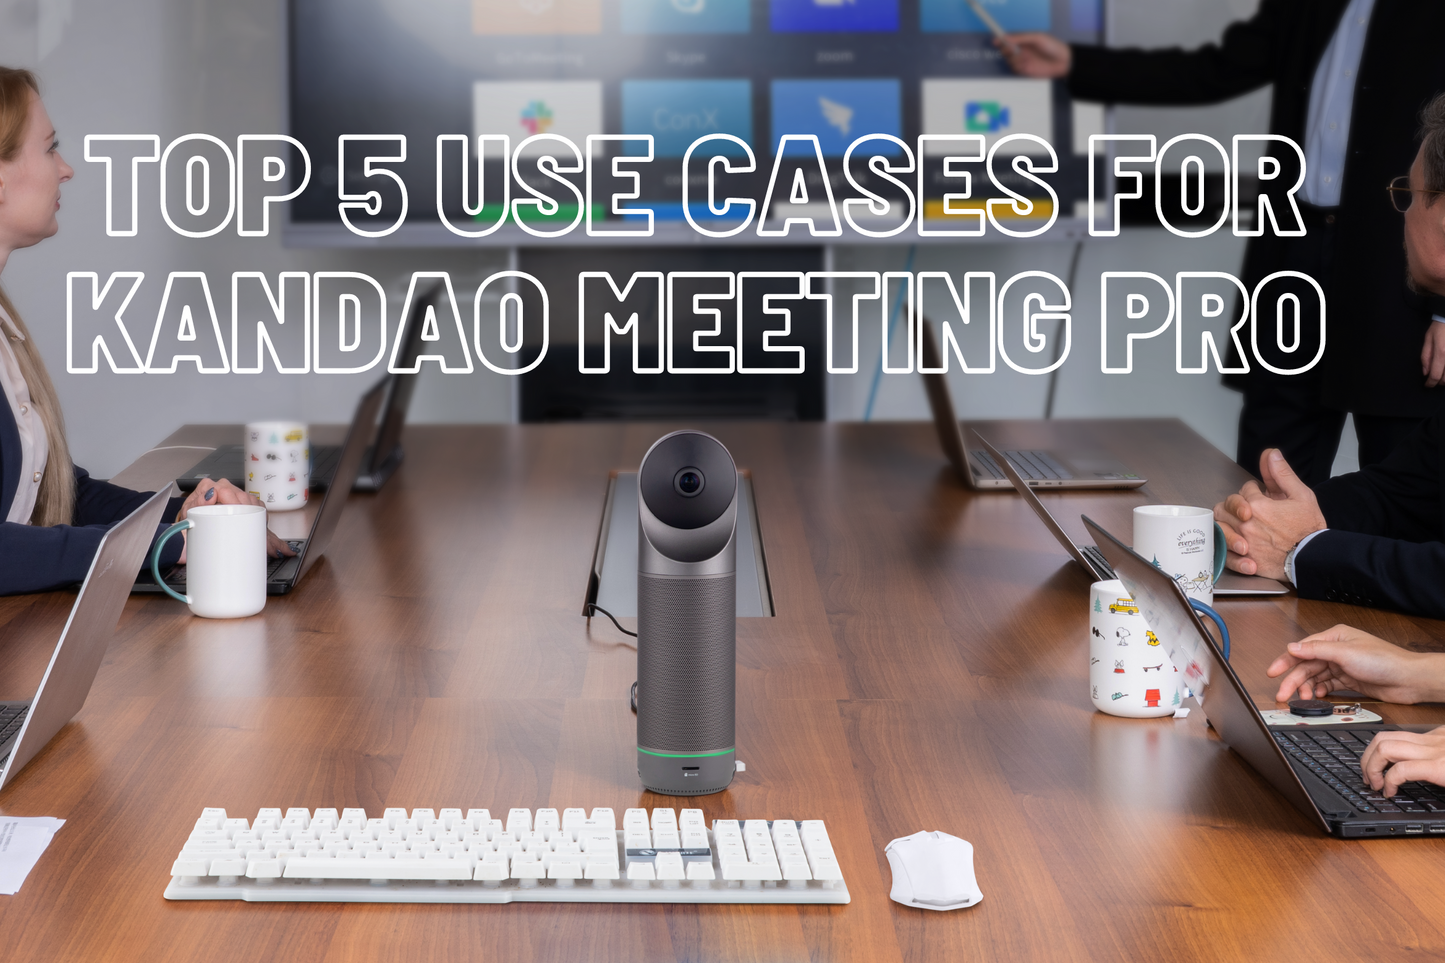 Top 5 Use Cases for Kandao Meeting Pro